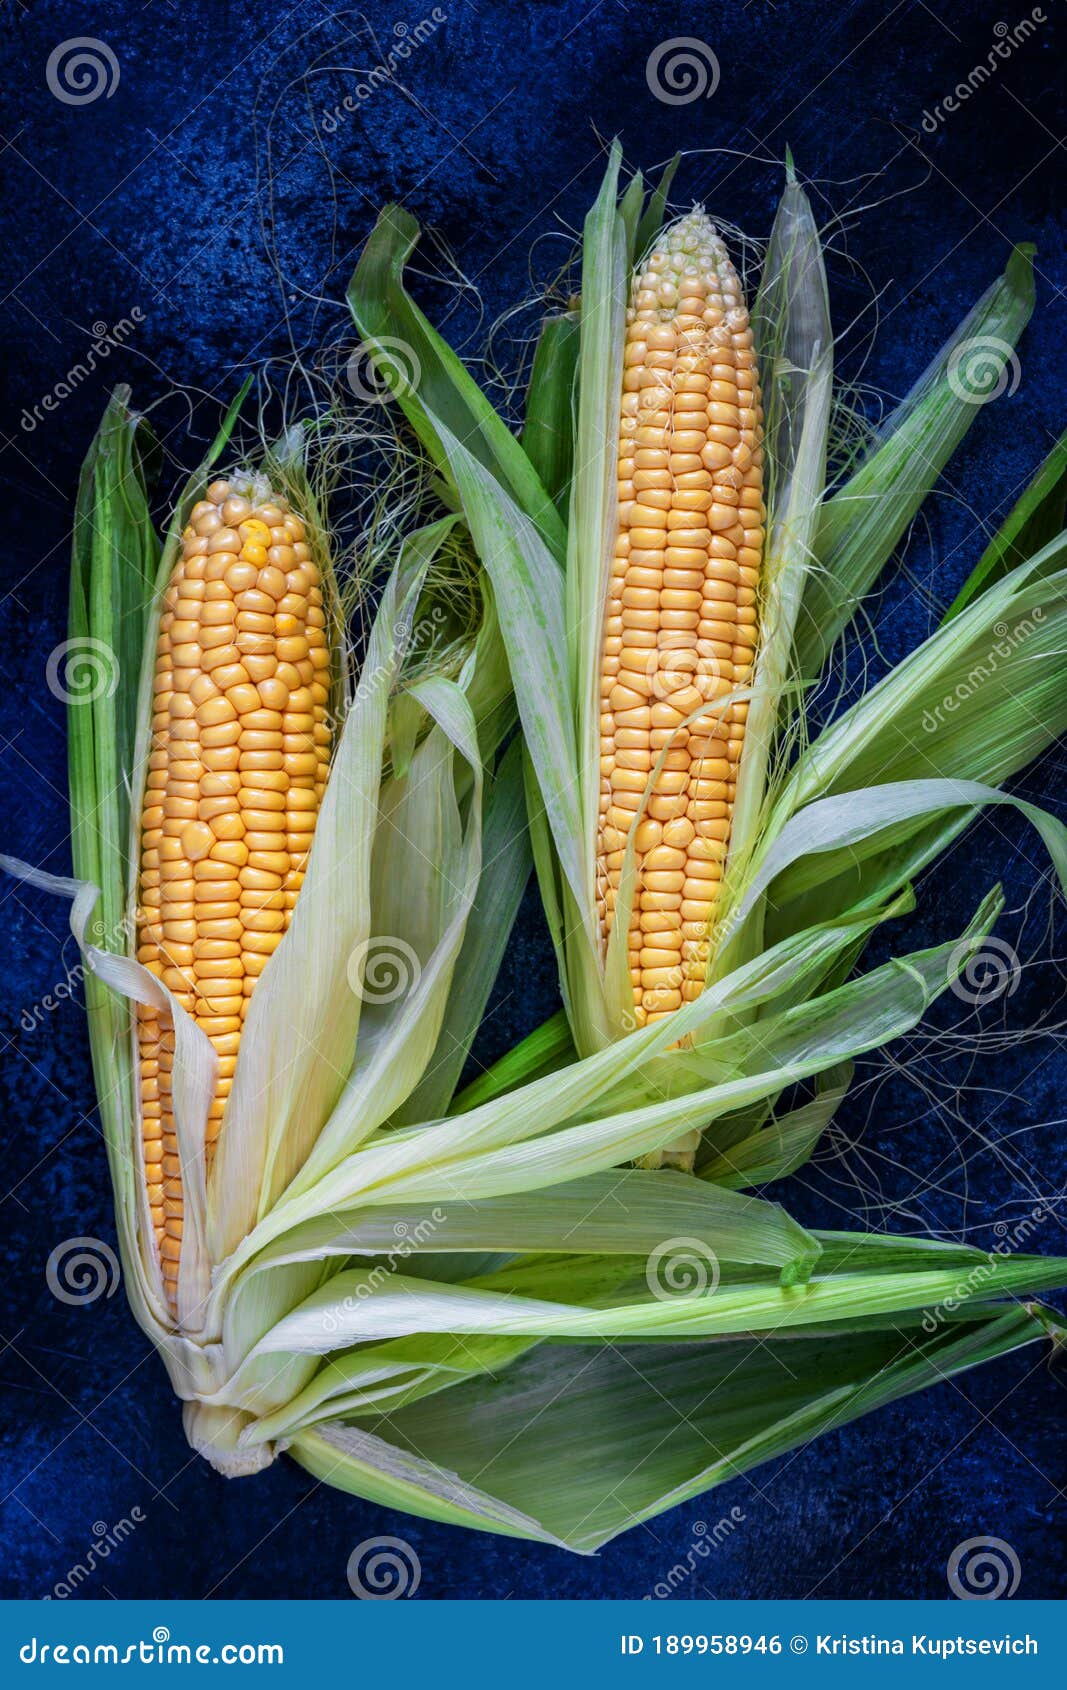 Two Cobs Of Young Yellow Corn With Beautifully Spread Leaves On A Dark 